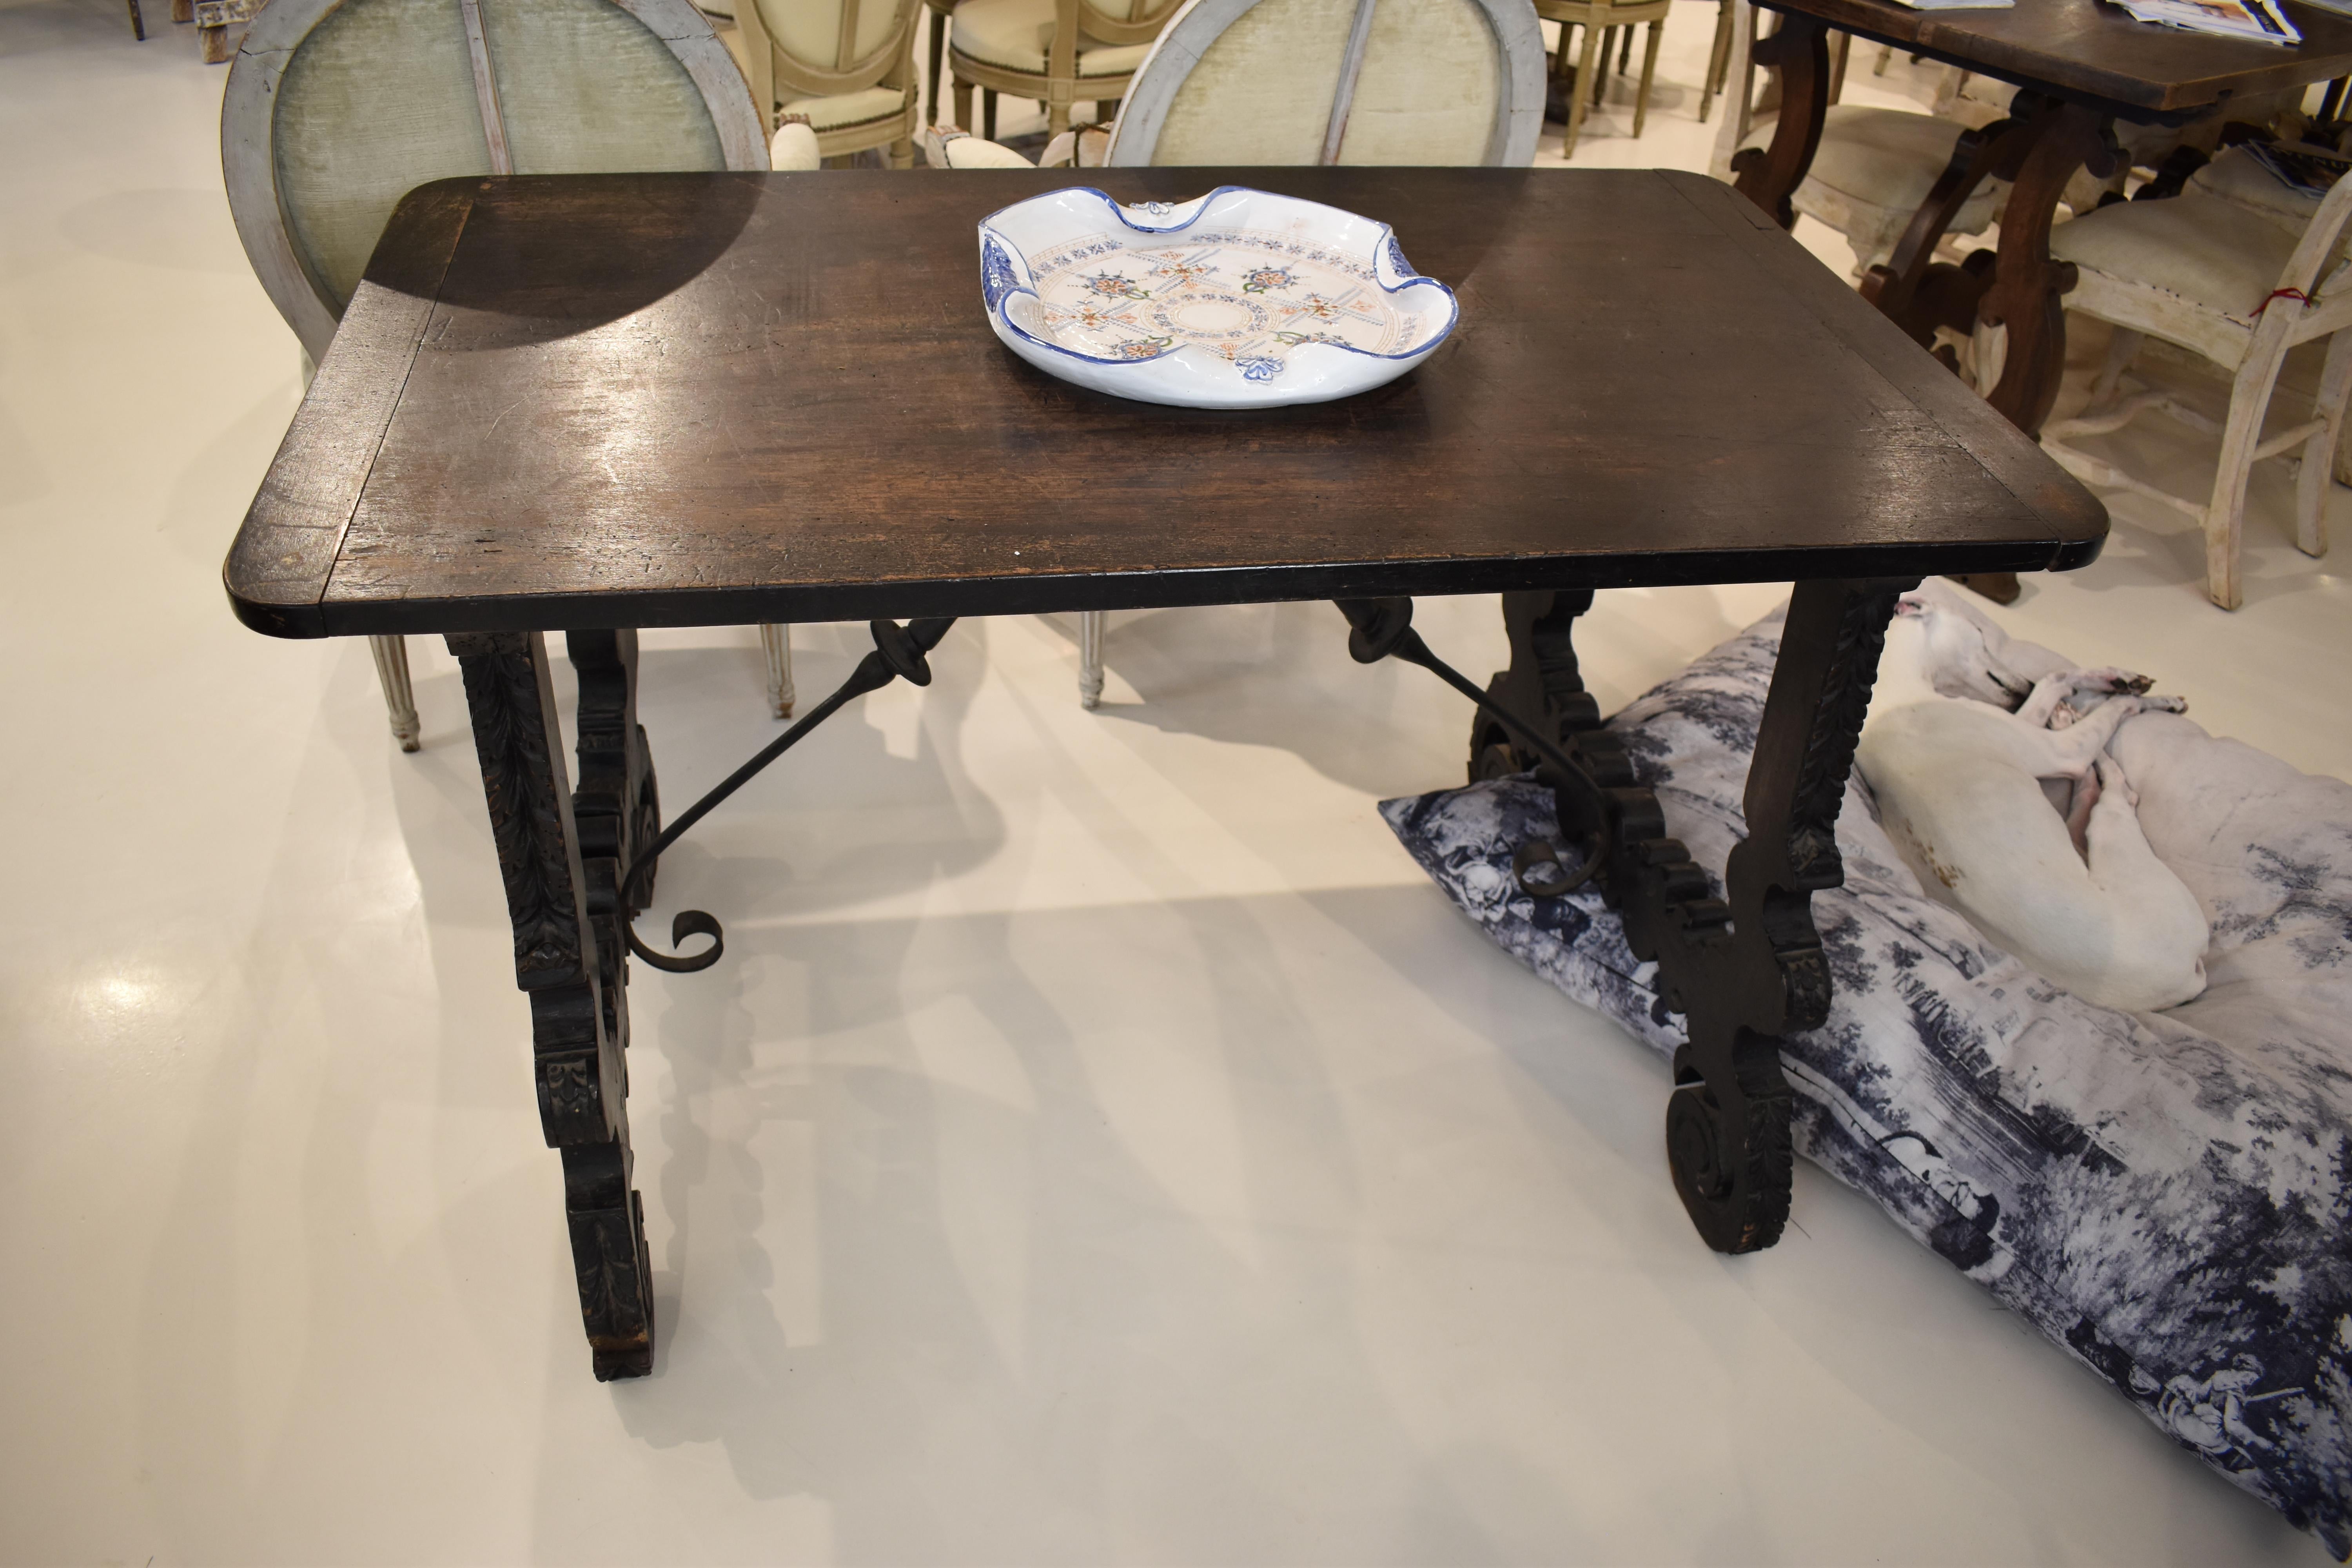 18th Century Noir Spanish Table with wrought ironwork braces in a cross-bar design.